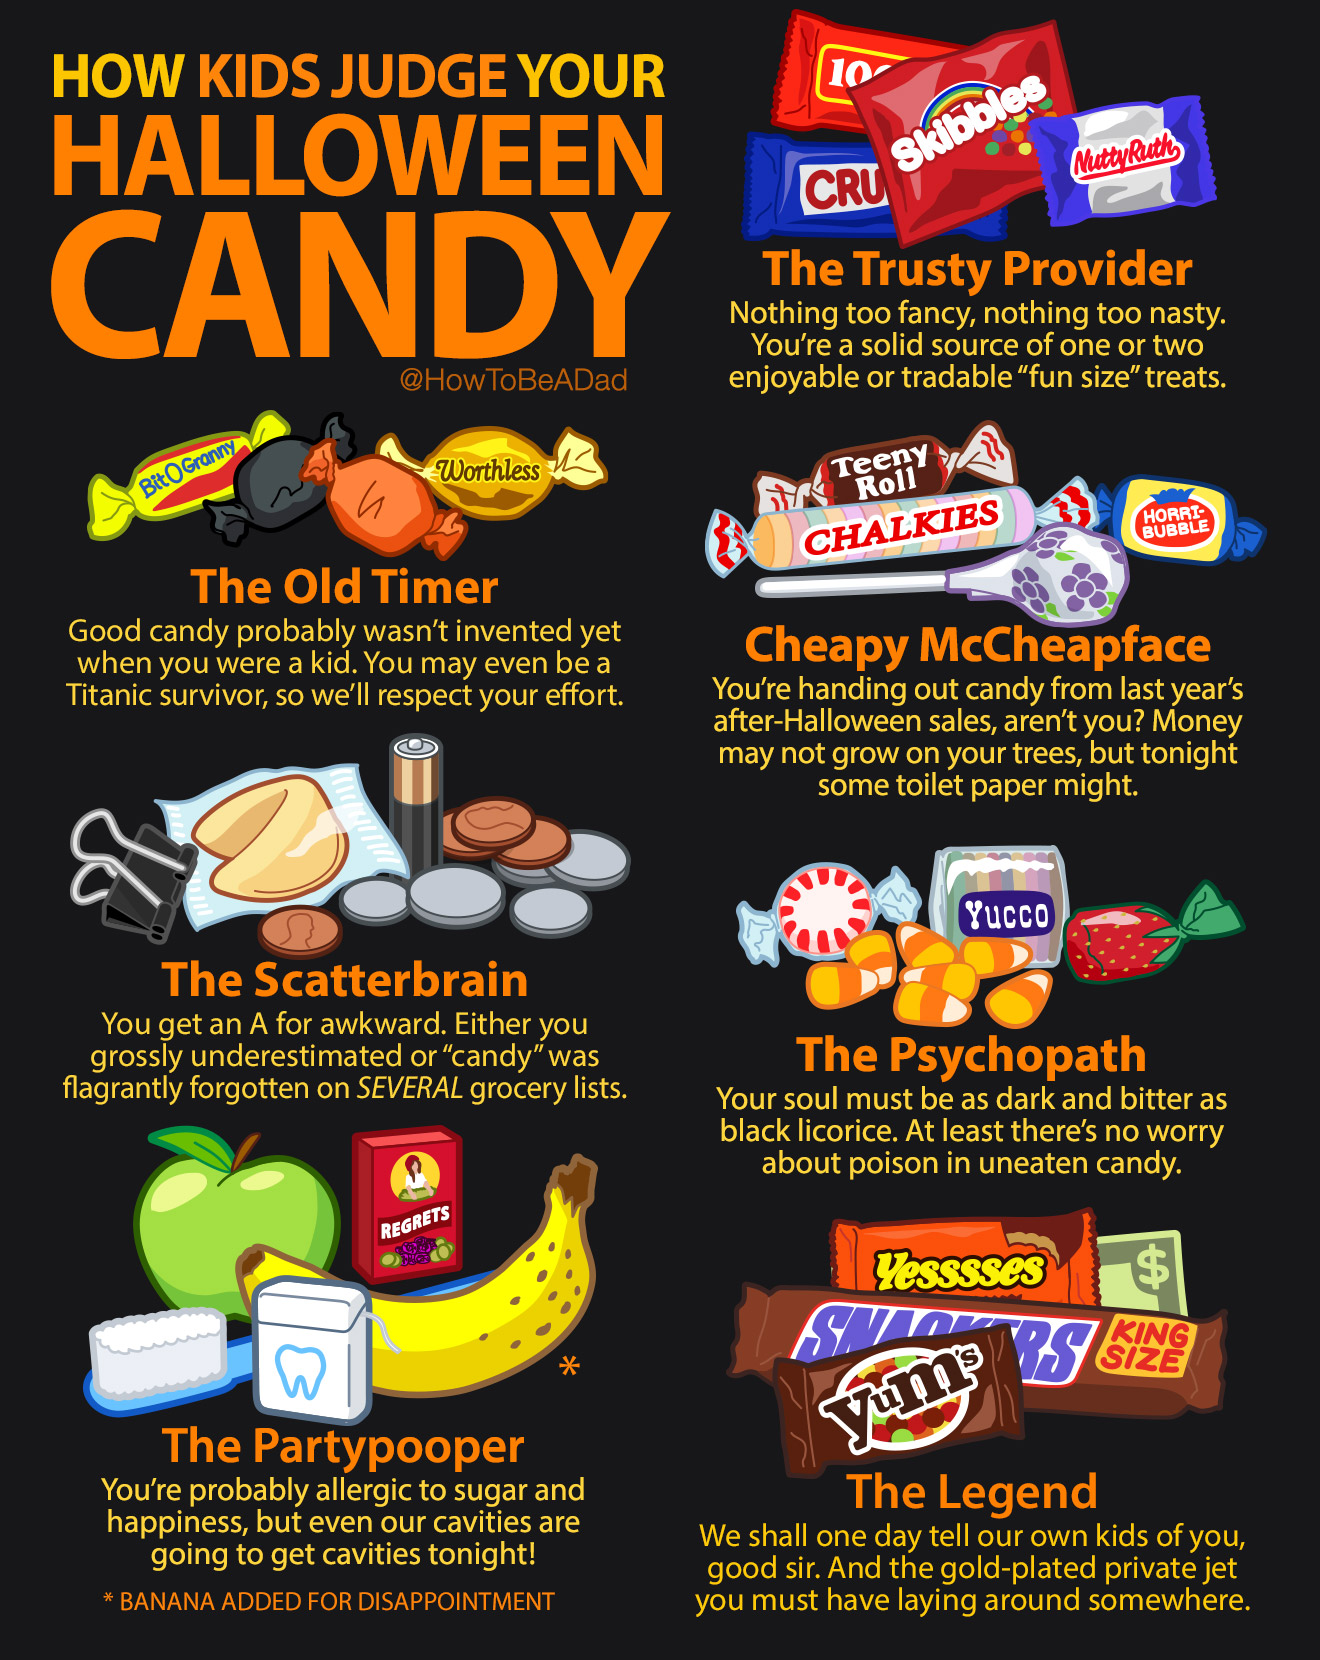 Guide to How Kids Judge Your Halloween Candy